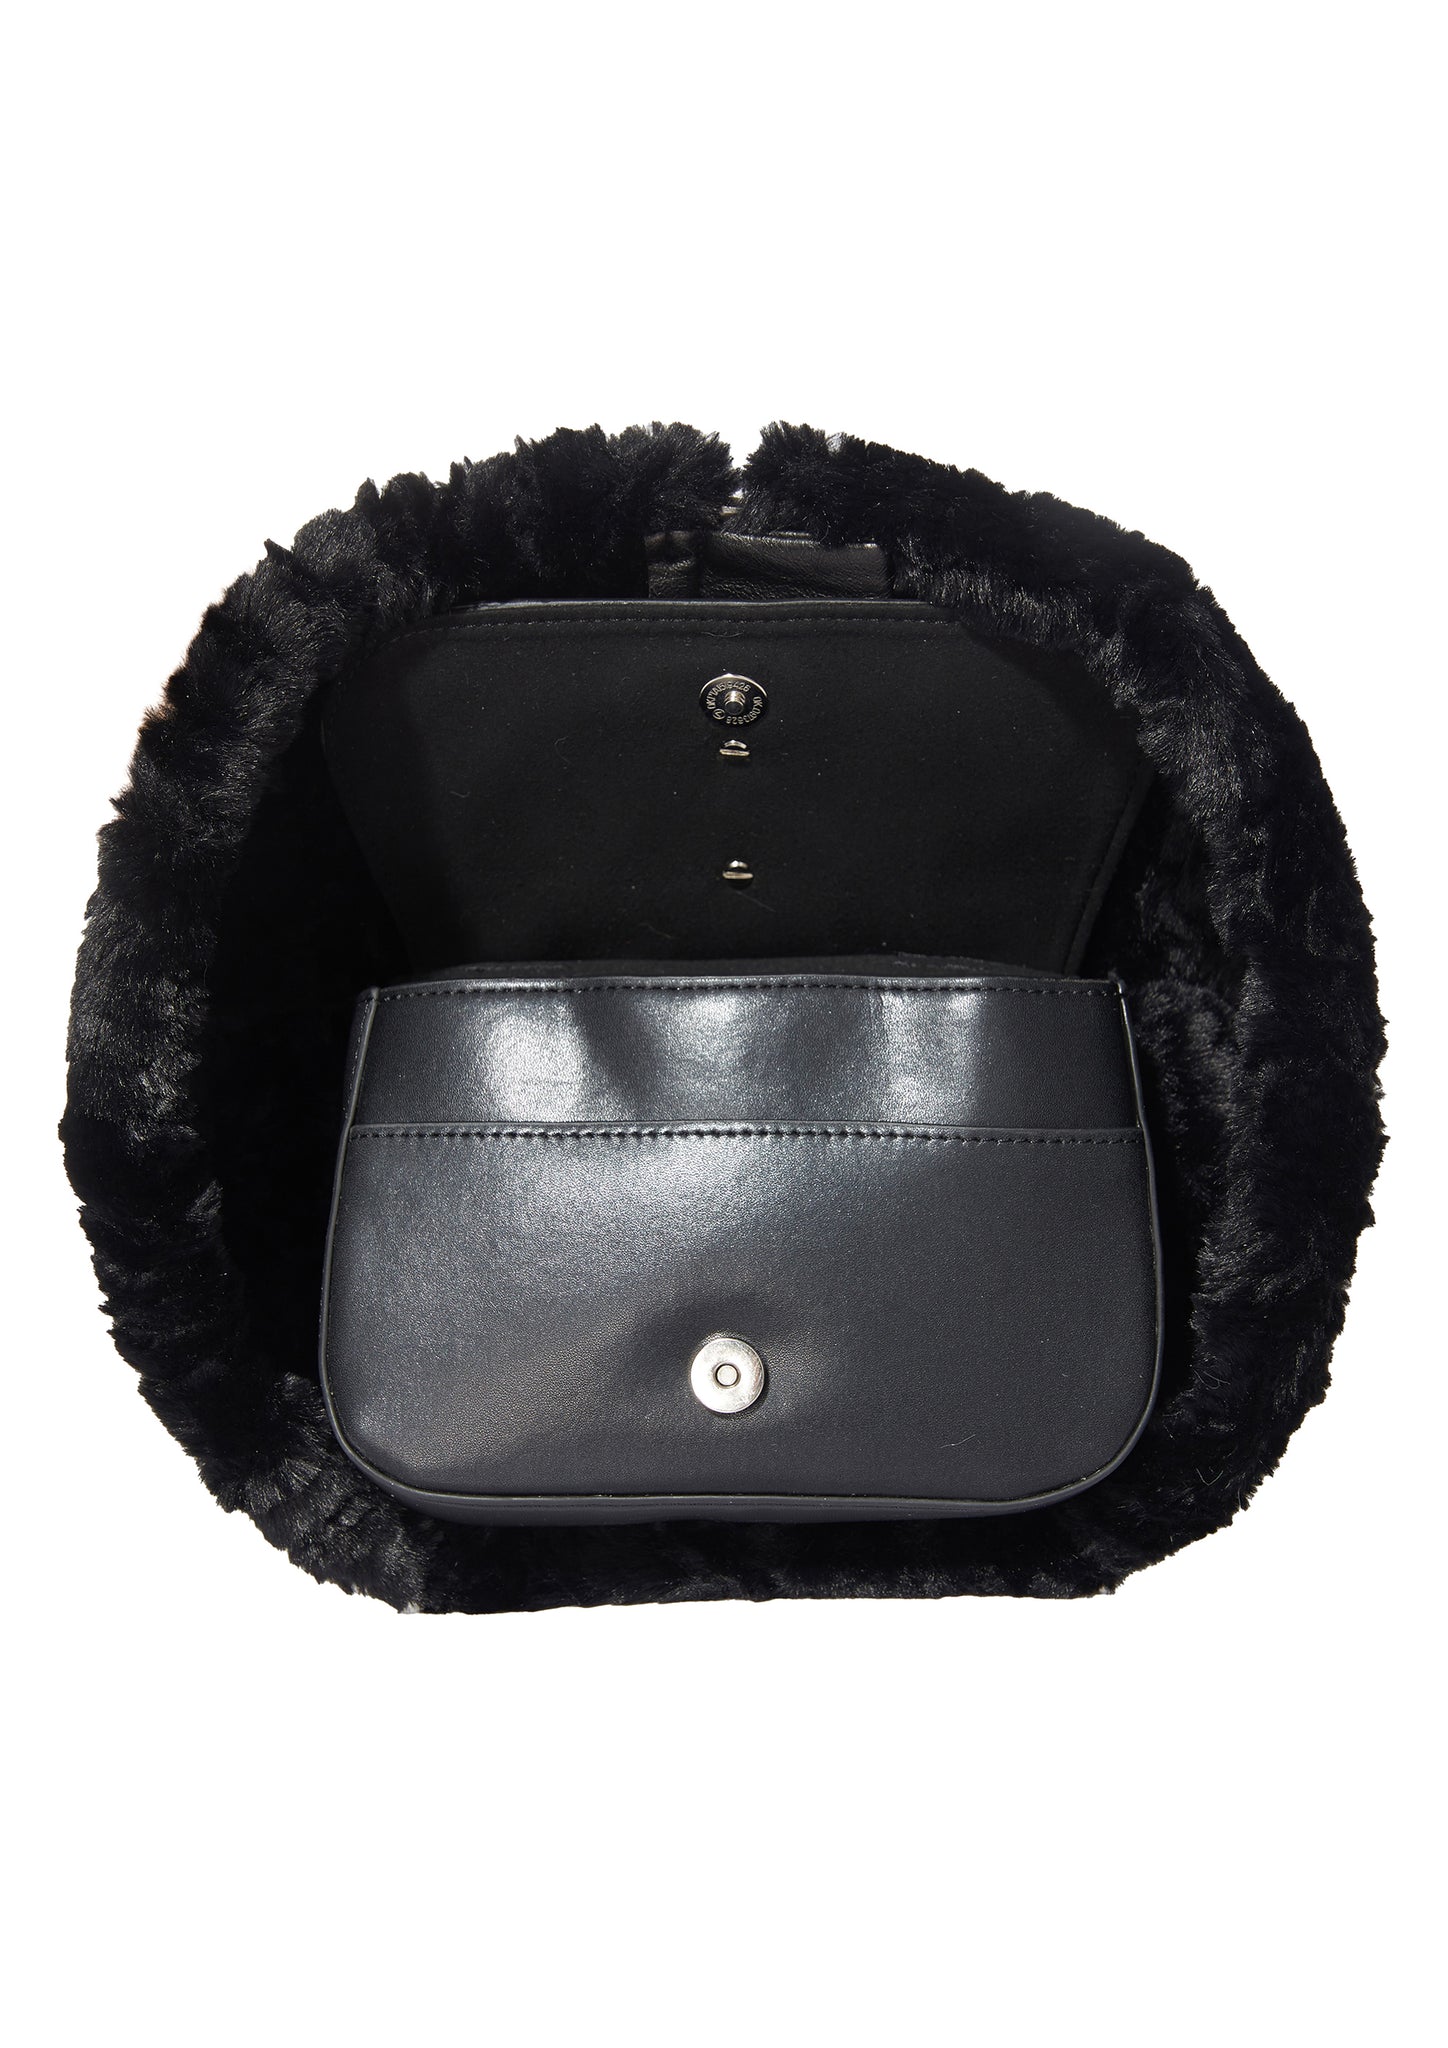 SMALL SIZE FUR JACKET BAG IN BLACK